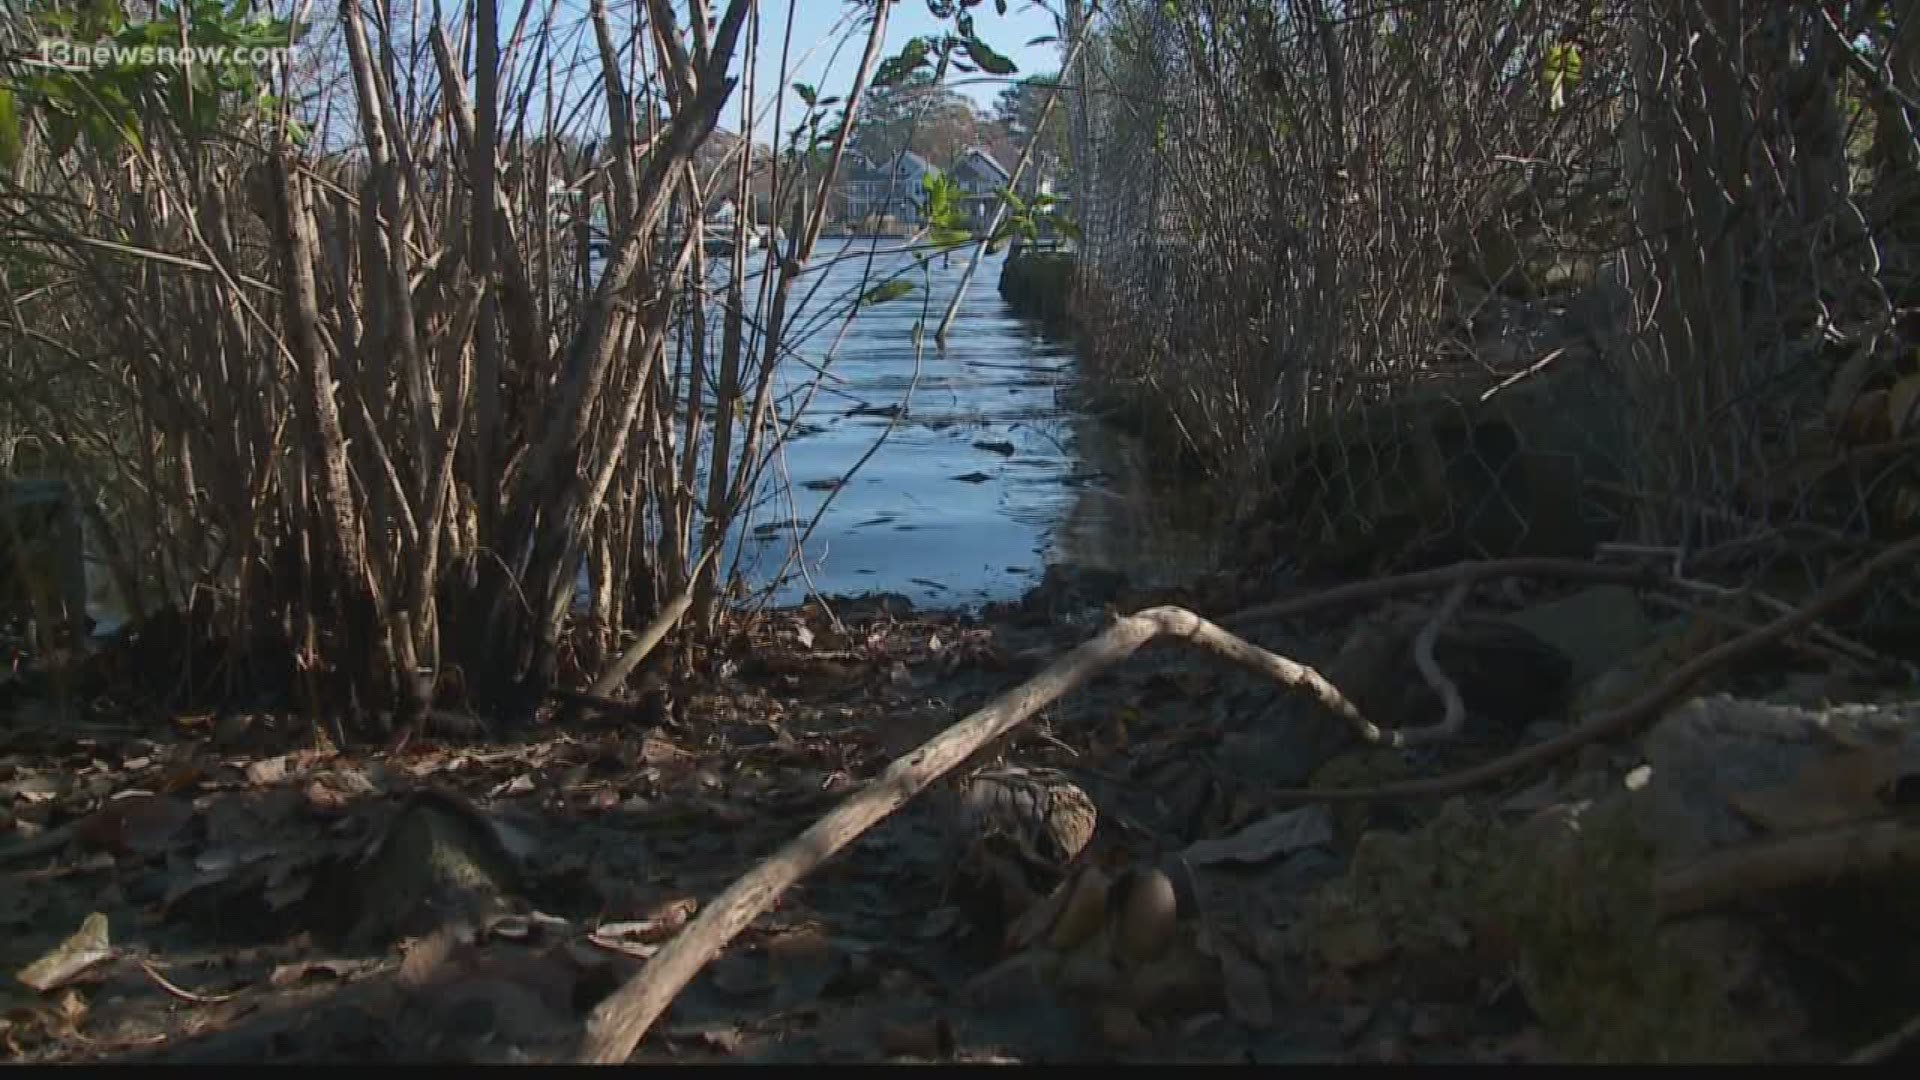 There's a new effort in Norfolk to fight flooding in one neighborhood.